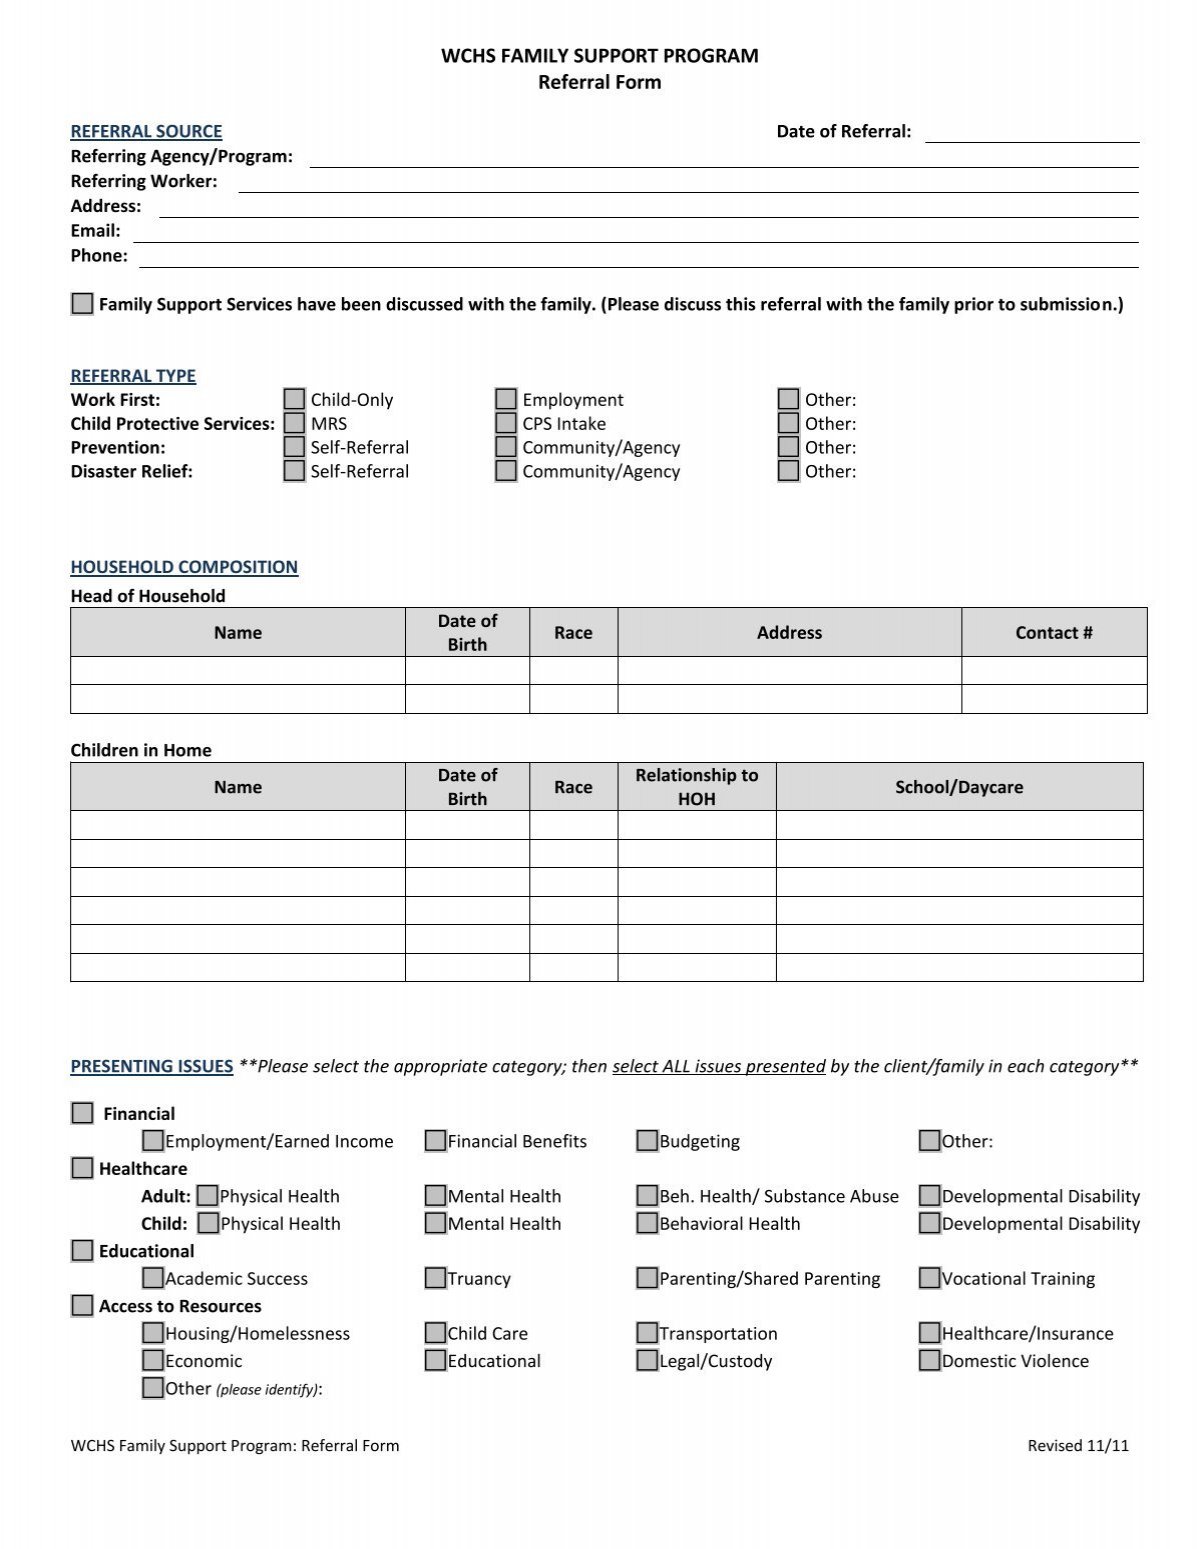 Family Support Referral Form.pdf